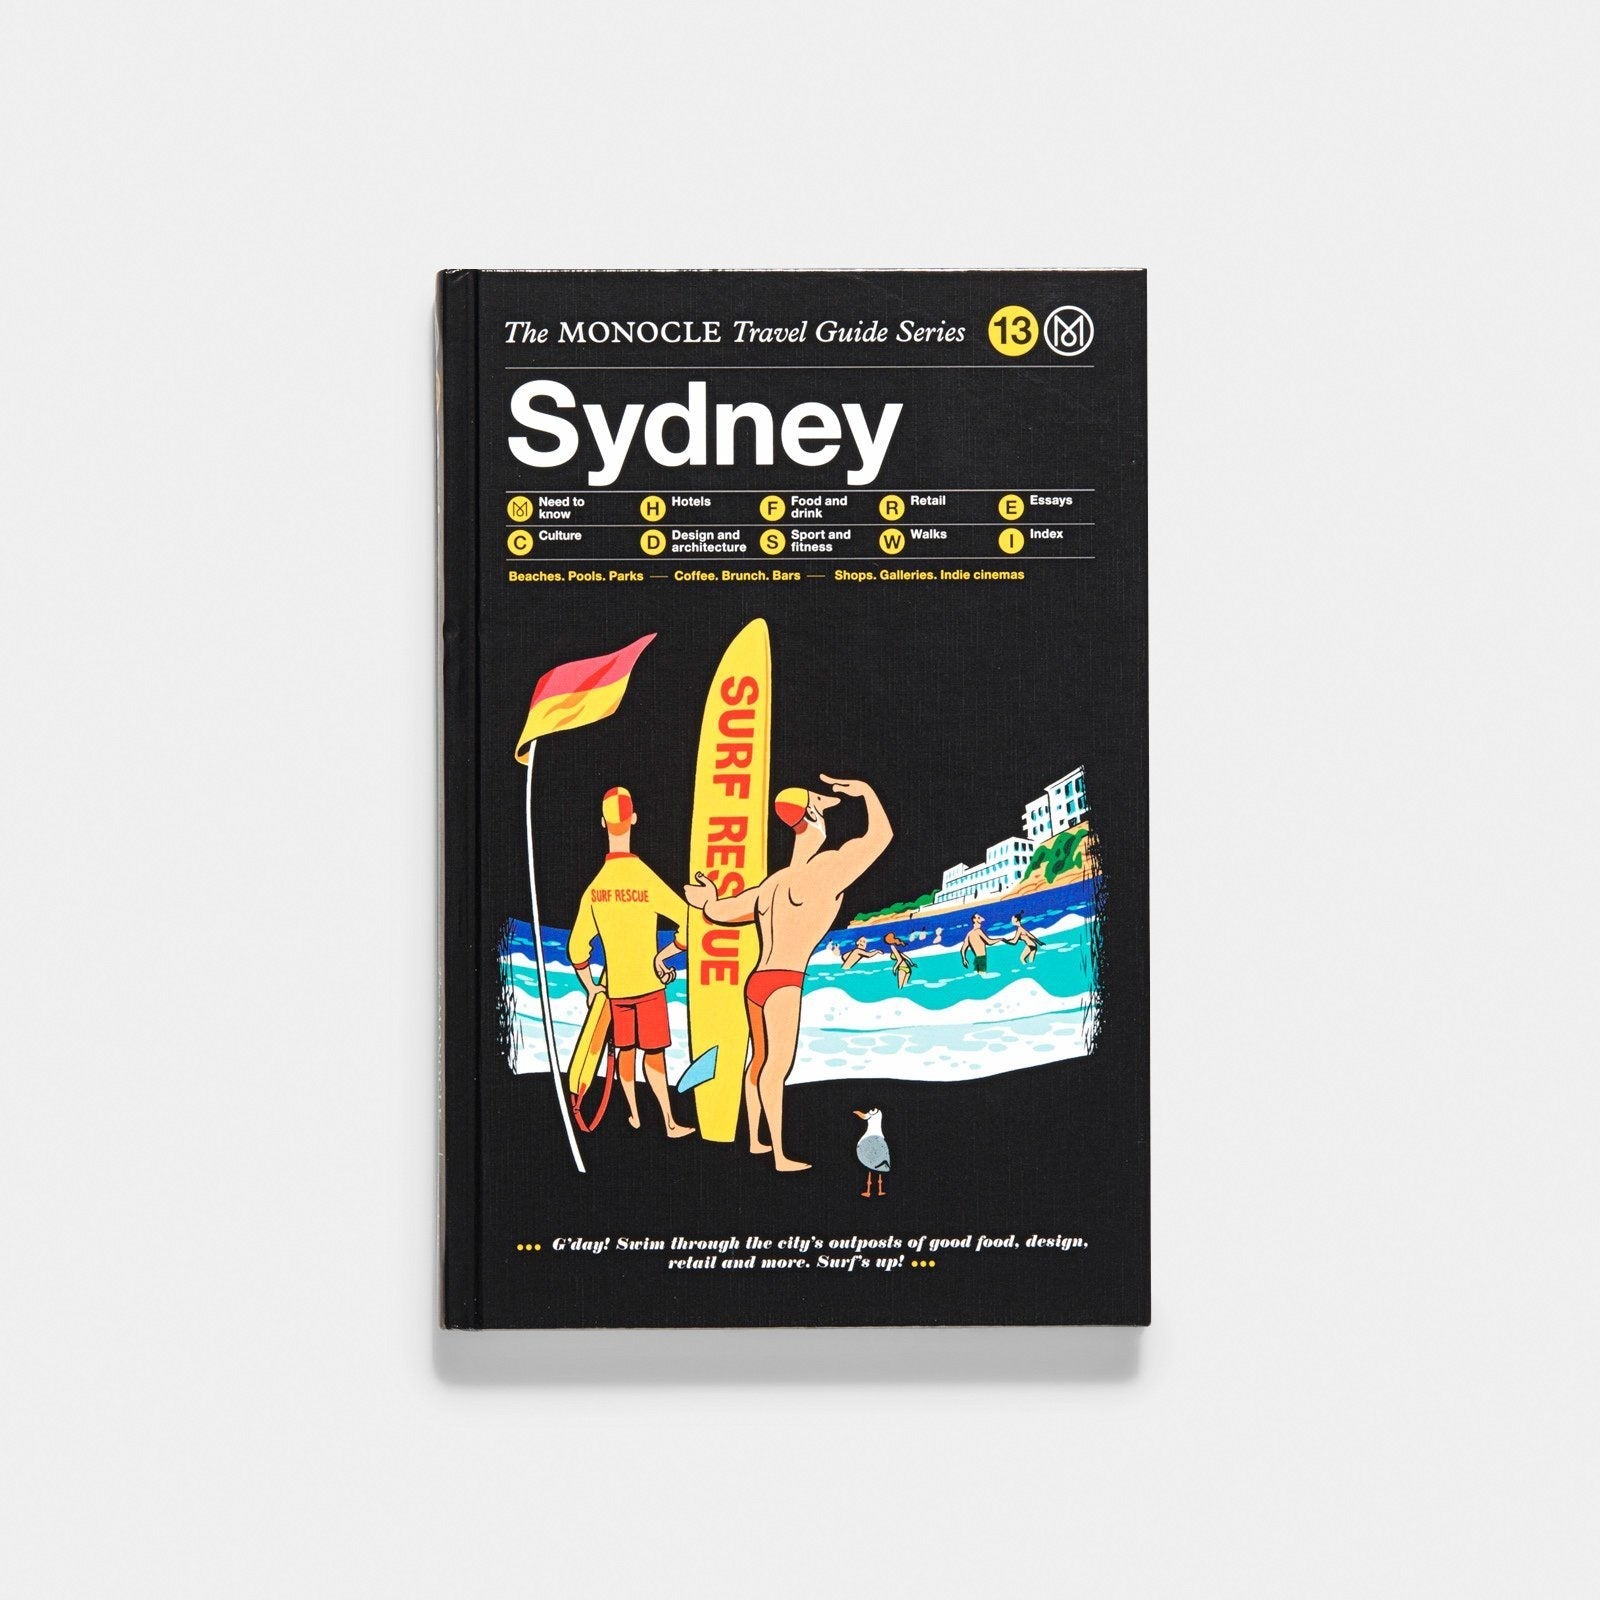 Sydney: The Monocle Travel Guide Series